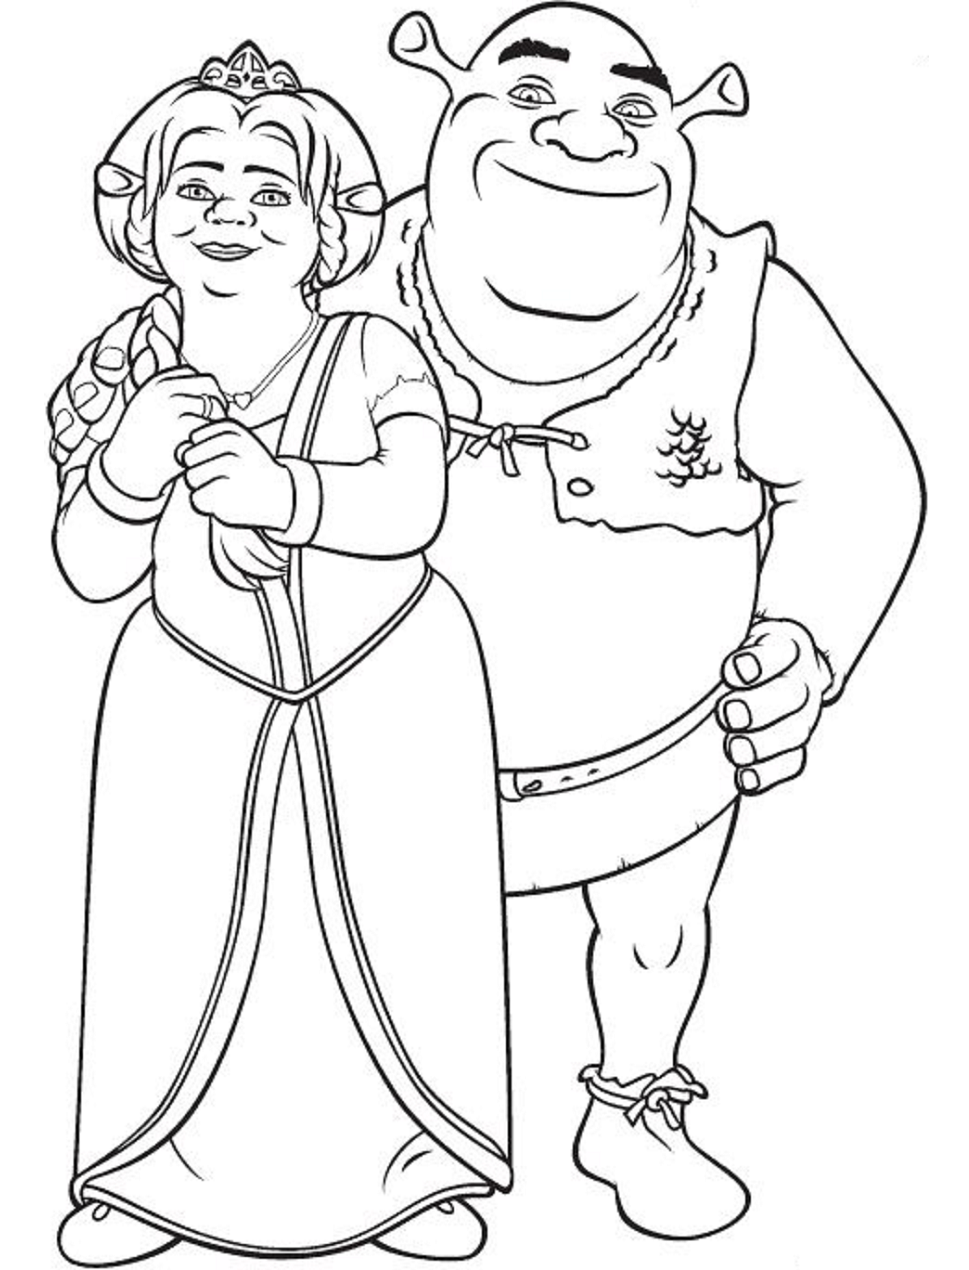 Princess Fiona Coloring Pages - Free Printable Coloring Pages for Kids